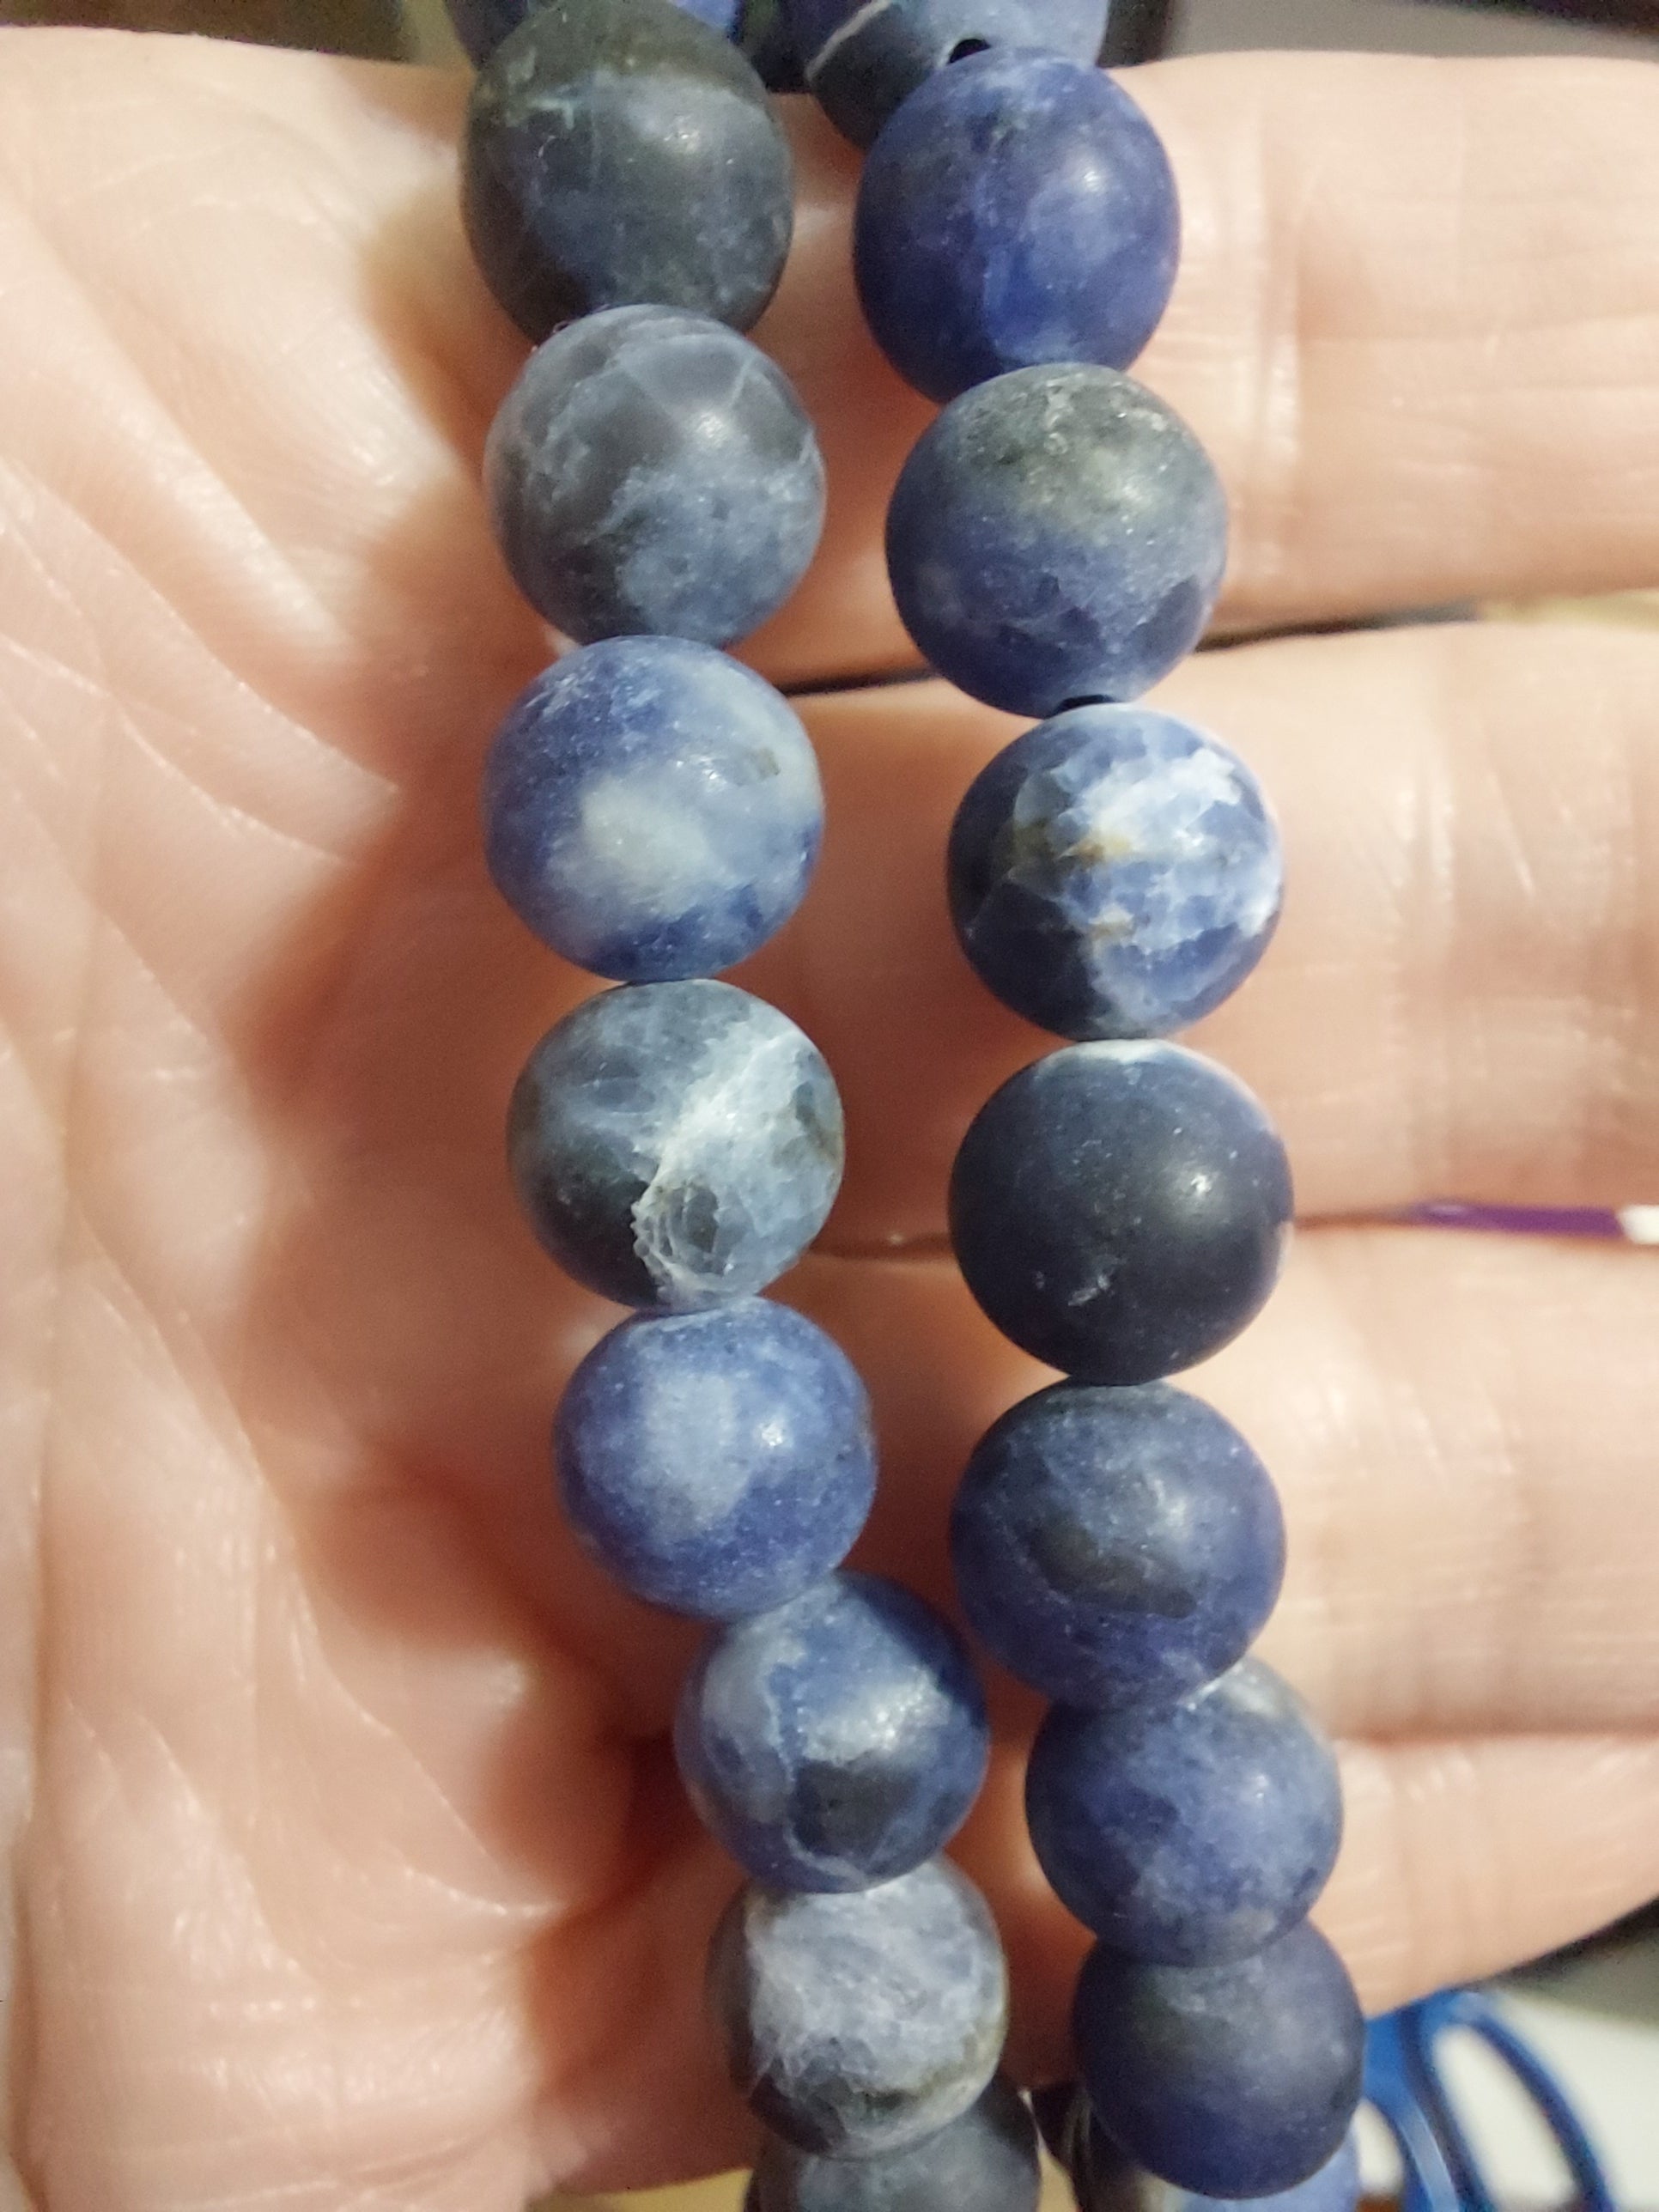 Sodalite Round Bead Frosted Matte Bracelet - 8mm Bead - For Larger Wrist